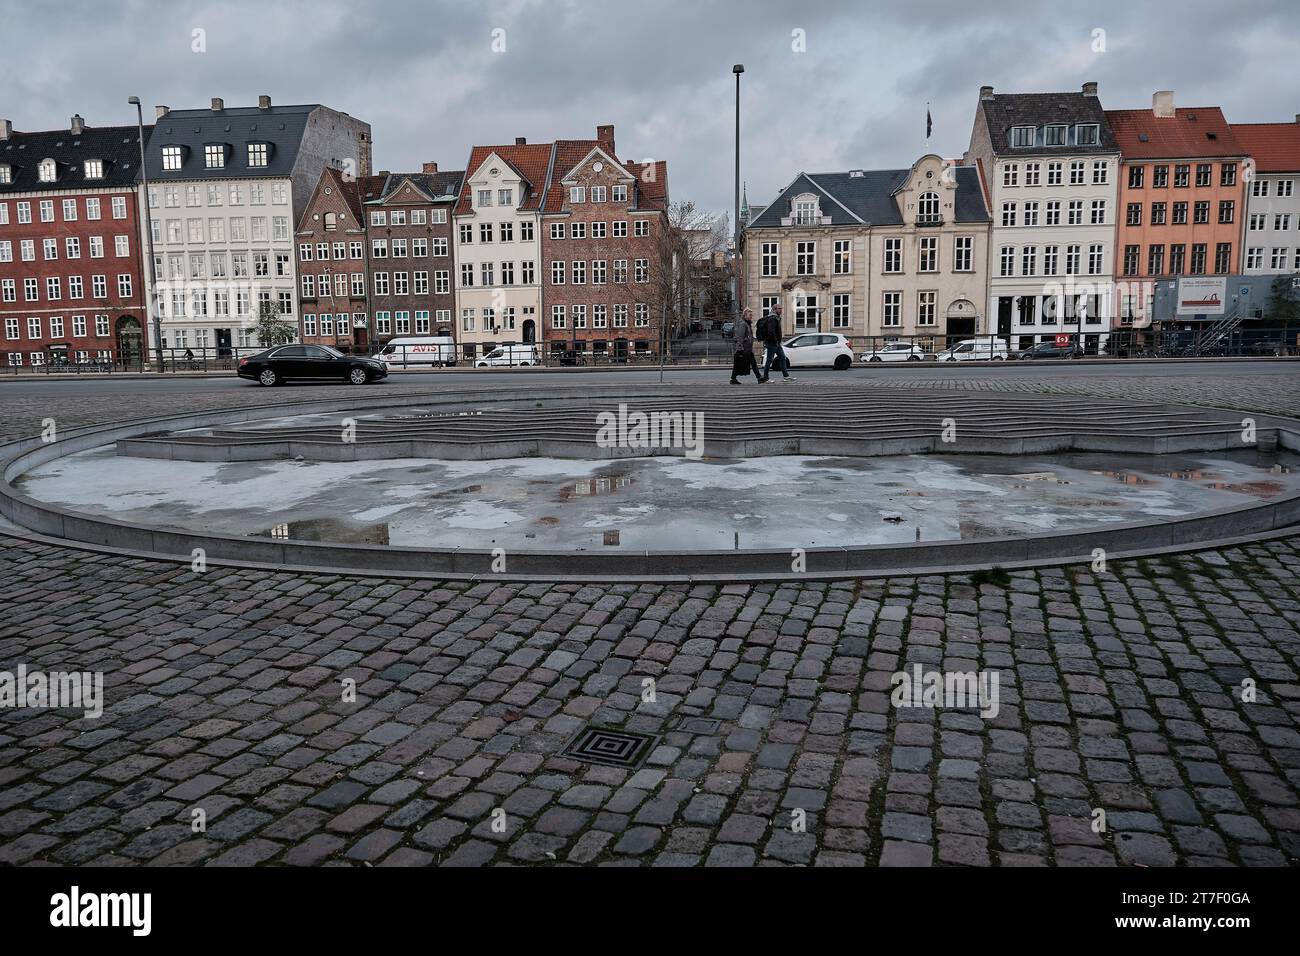 Copenhagen, Denmark; November 28, 2022: image of a beautiful corner of Copenhagen, with two people walking and in the background traditional houses. Stock Photo